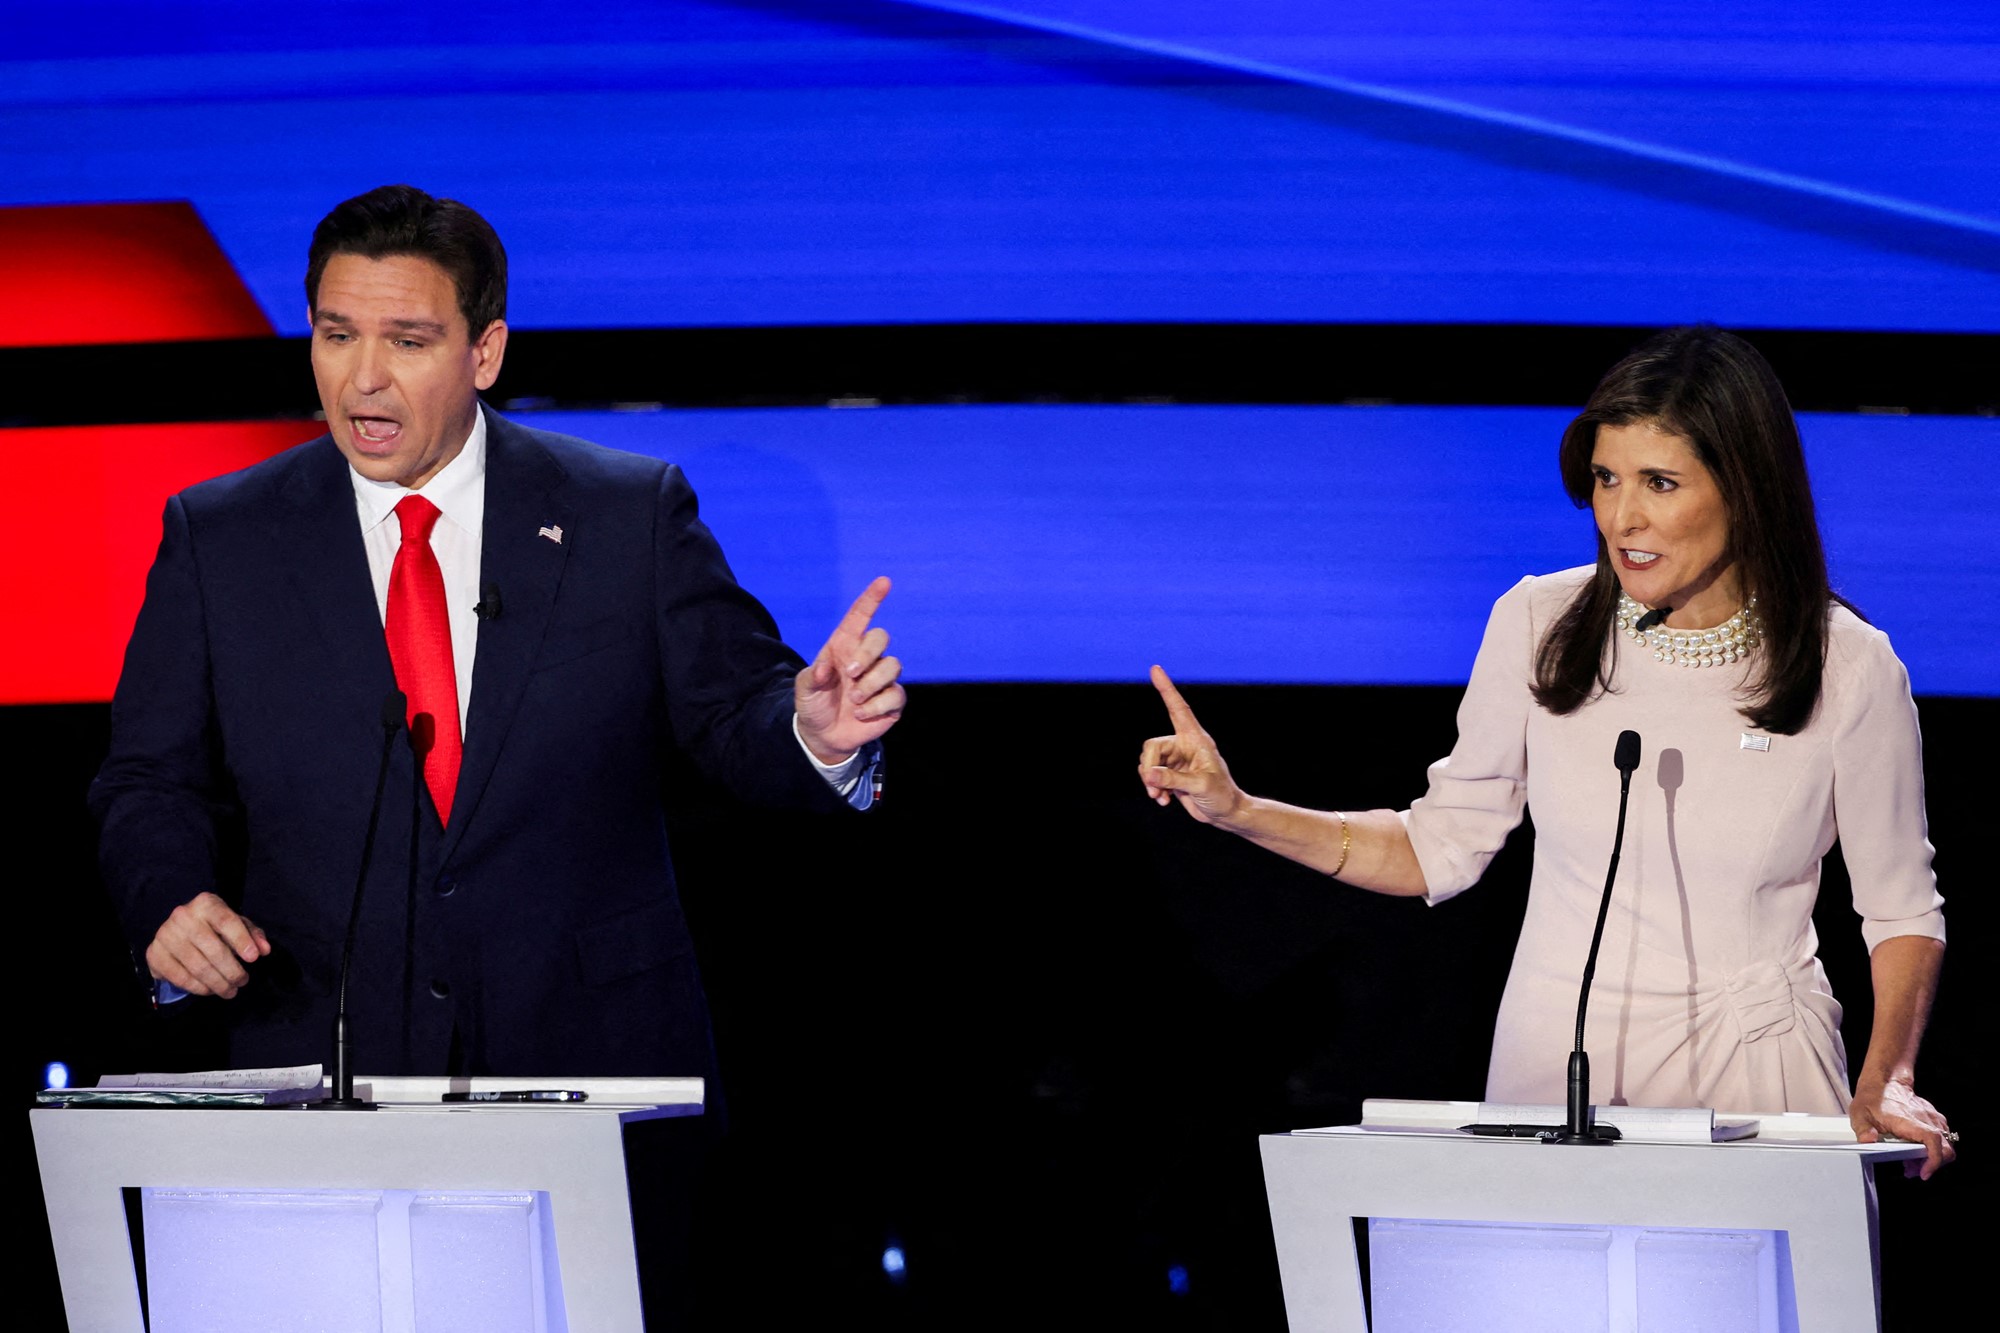 Ron DeSantis and Nikki Haley on stage arguing into microphones.